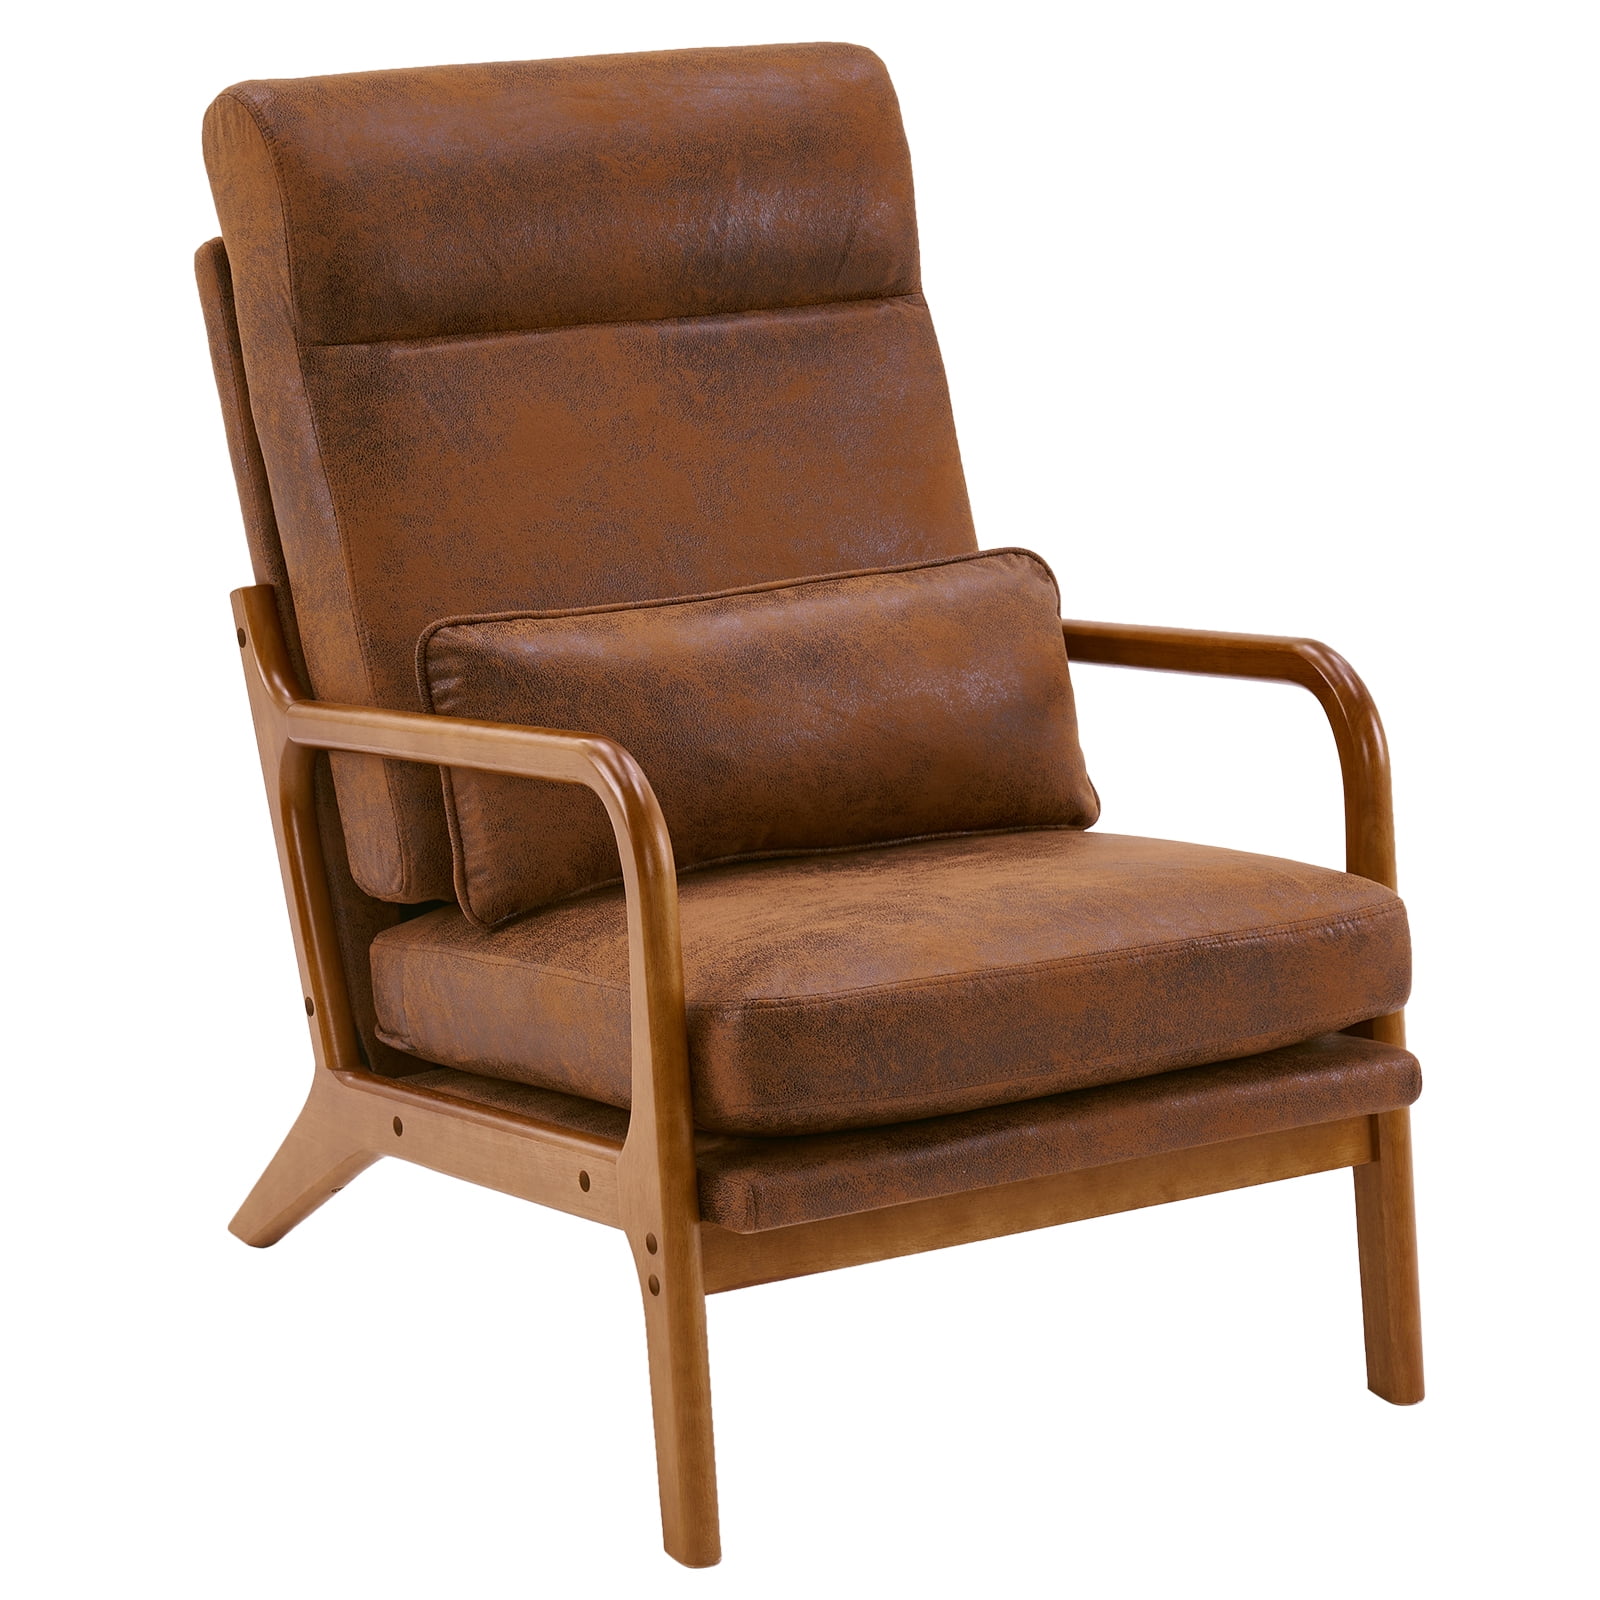 Ktaxon Mid Century Modern Accent Chair, Bronzing Cloth Fabric Armchair,  High Back Single Sofa with Solid Wood Frame Brown